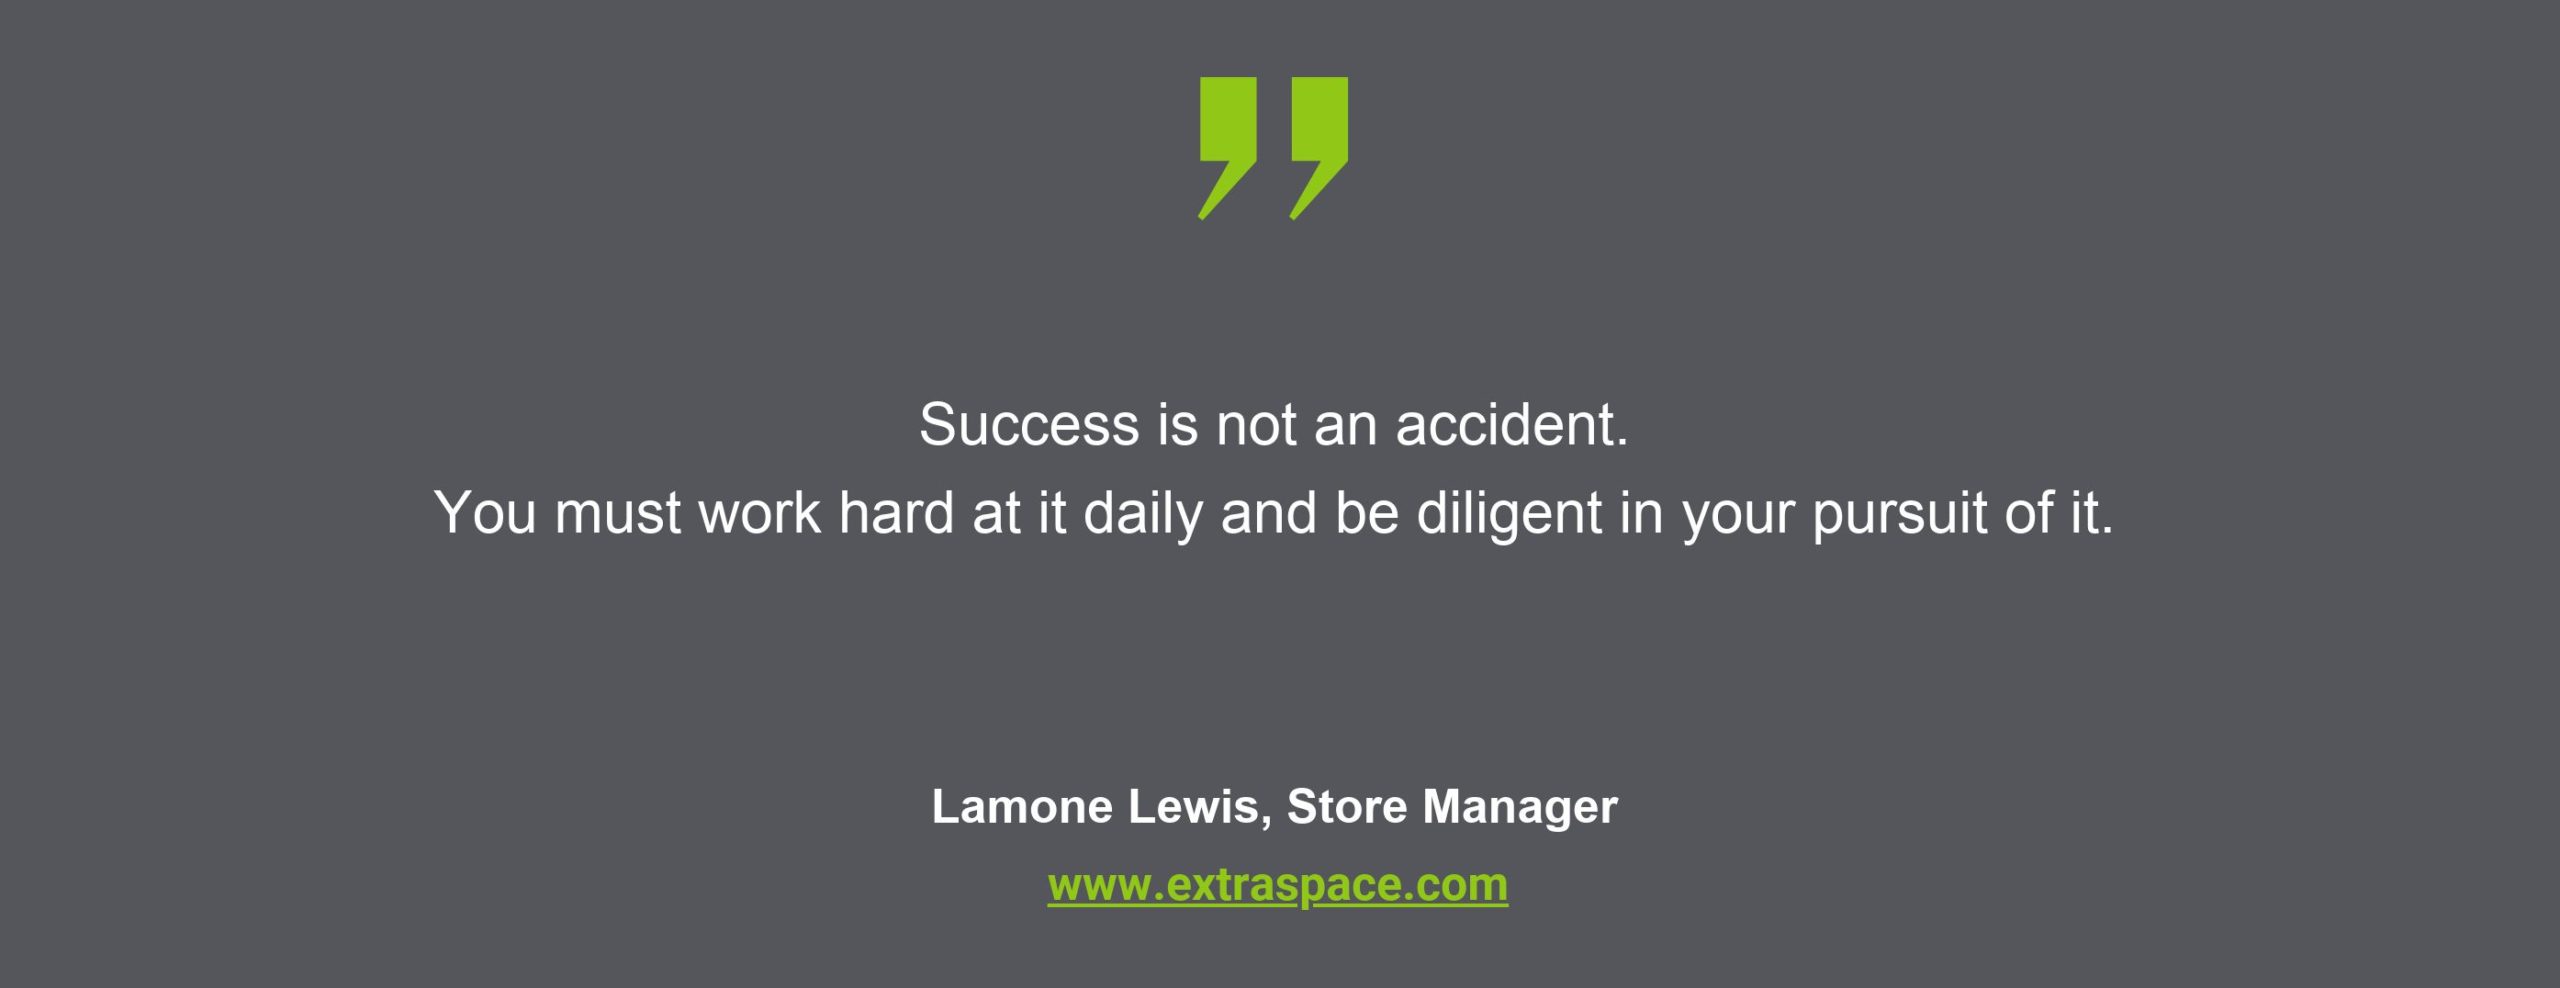 Extra Space Storage: Lamone Lewis Bosses Day Quote